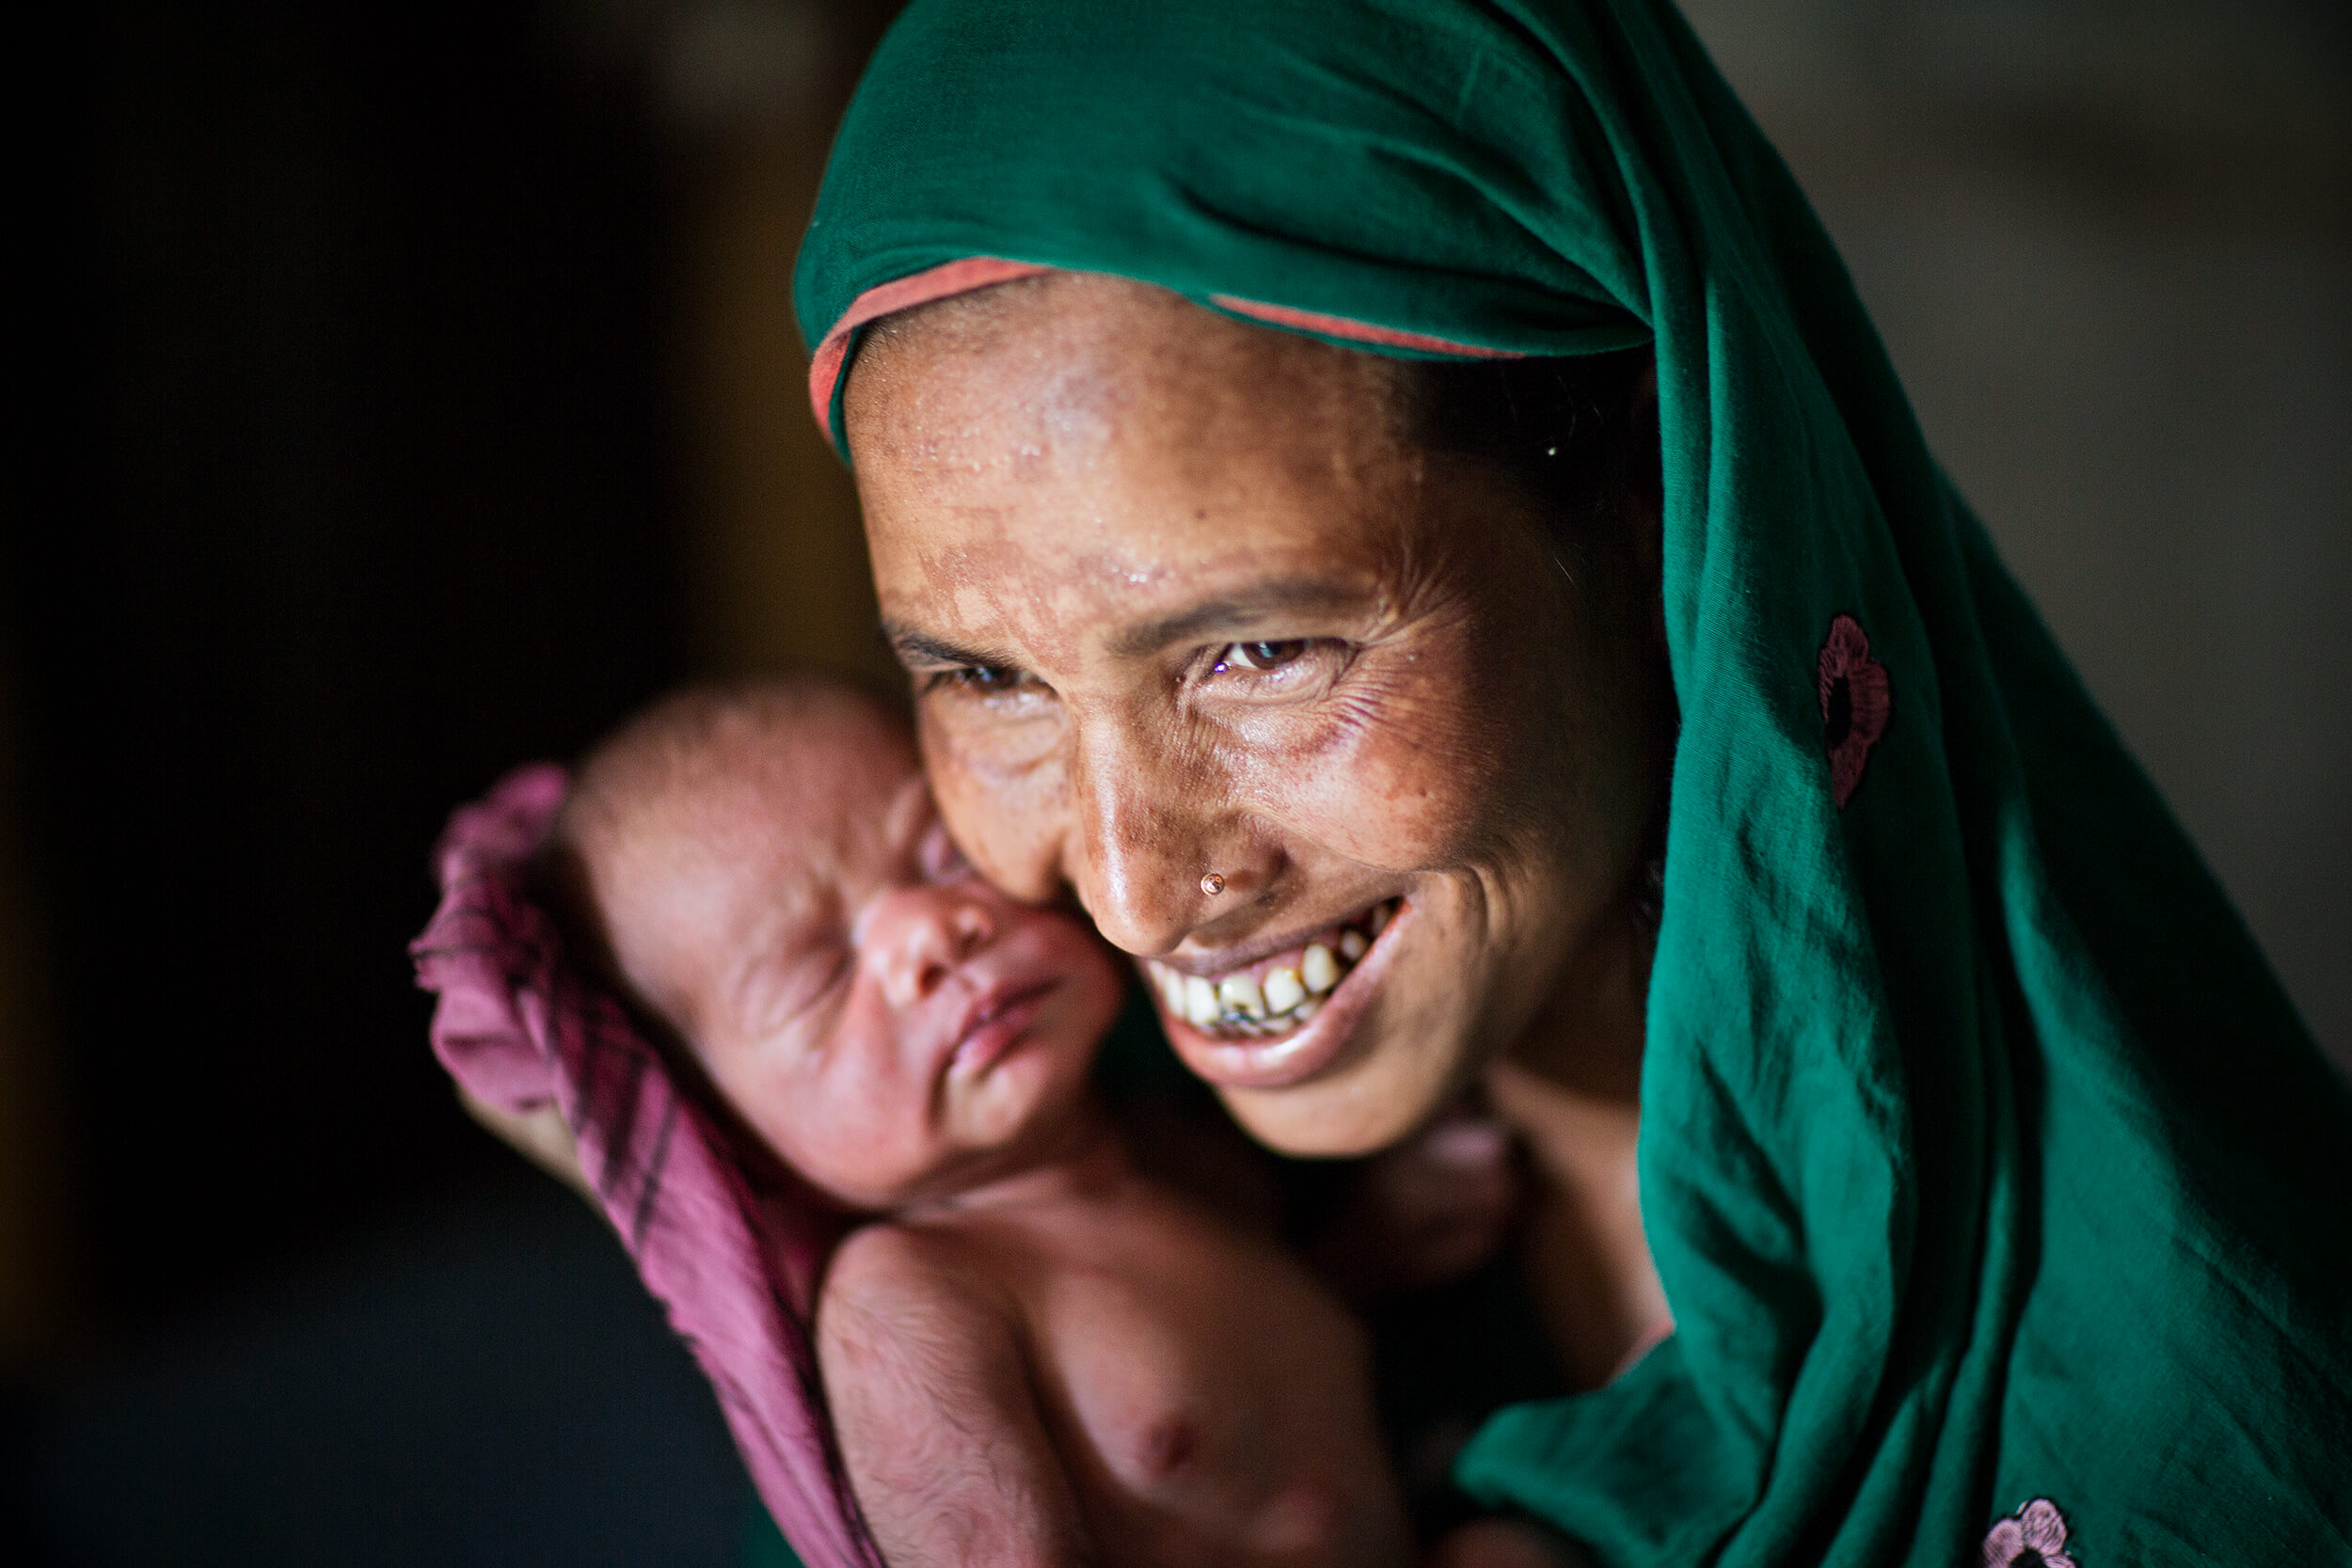  Bangladesh. Ruma Akhter, 22 years, with her little daughter Tanni 3 days old. 